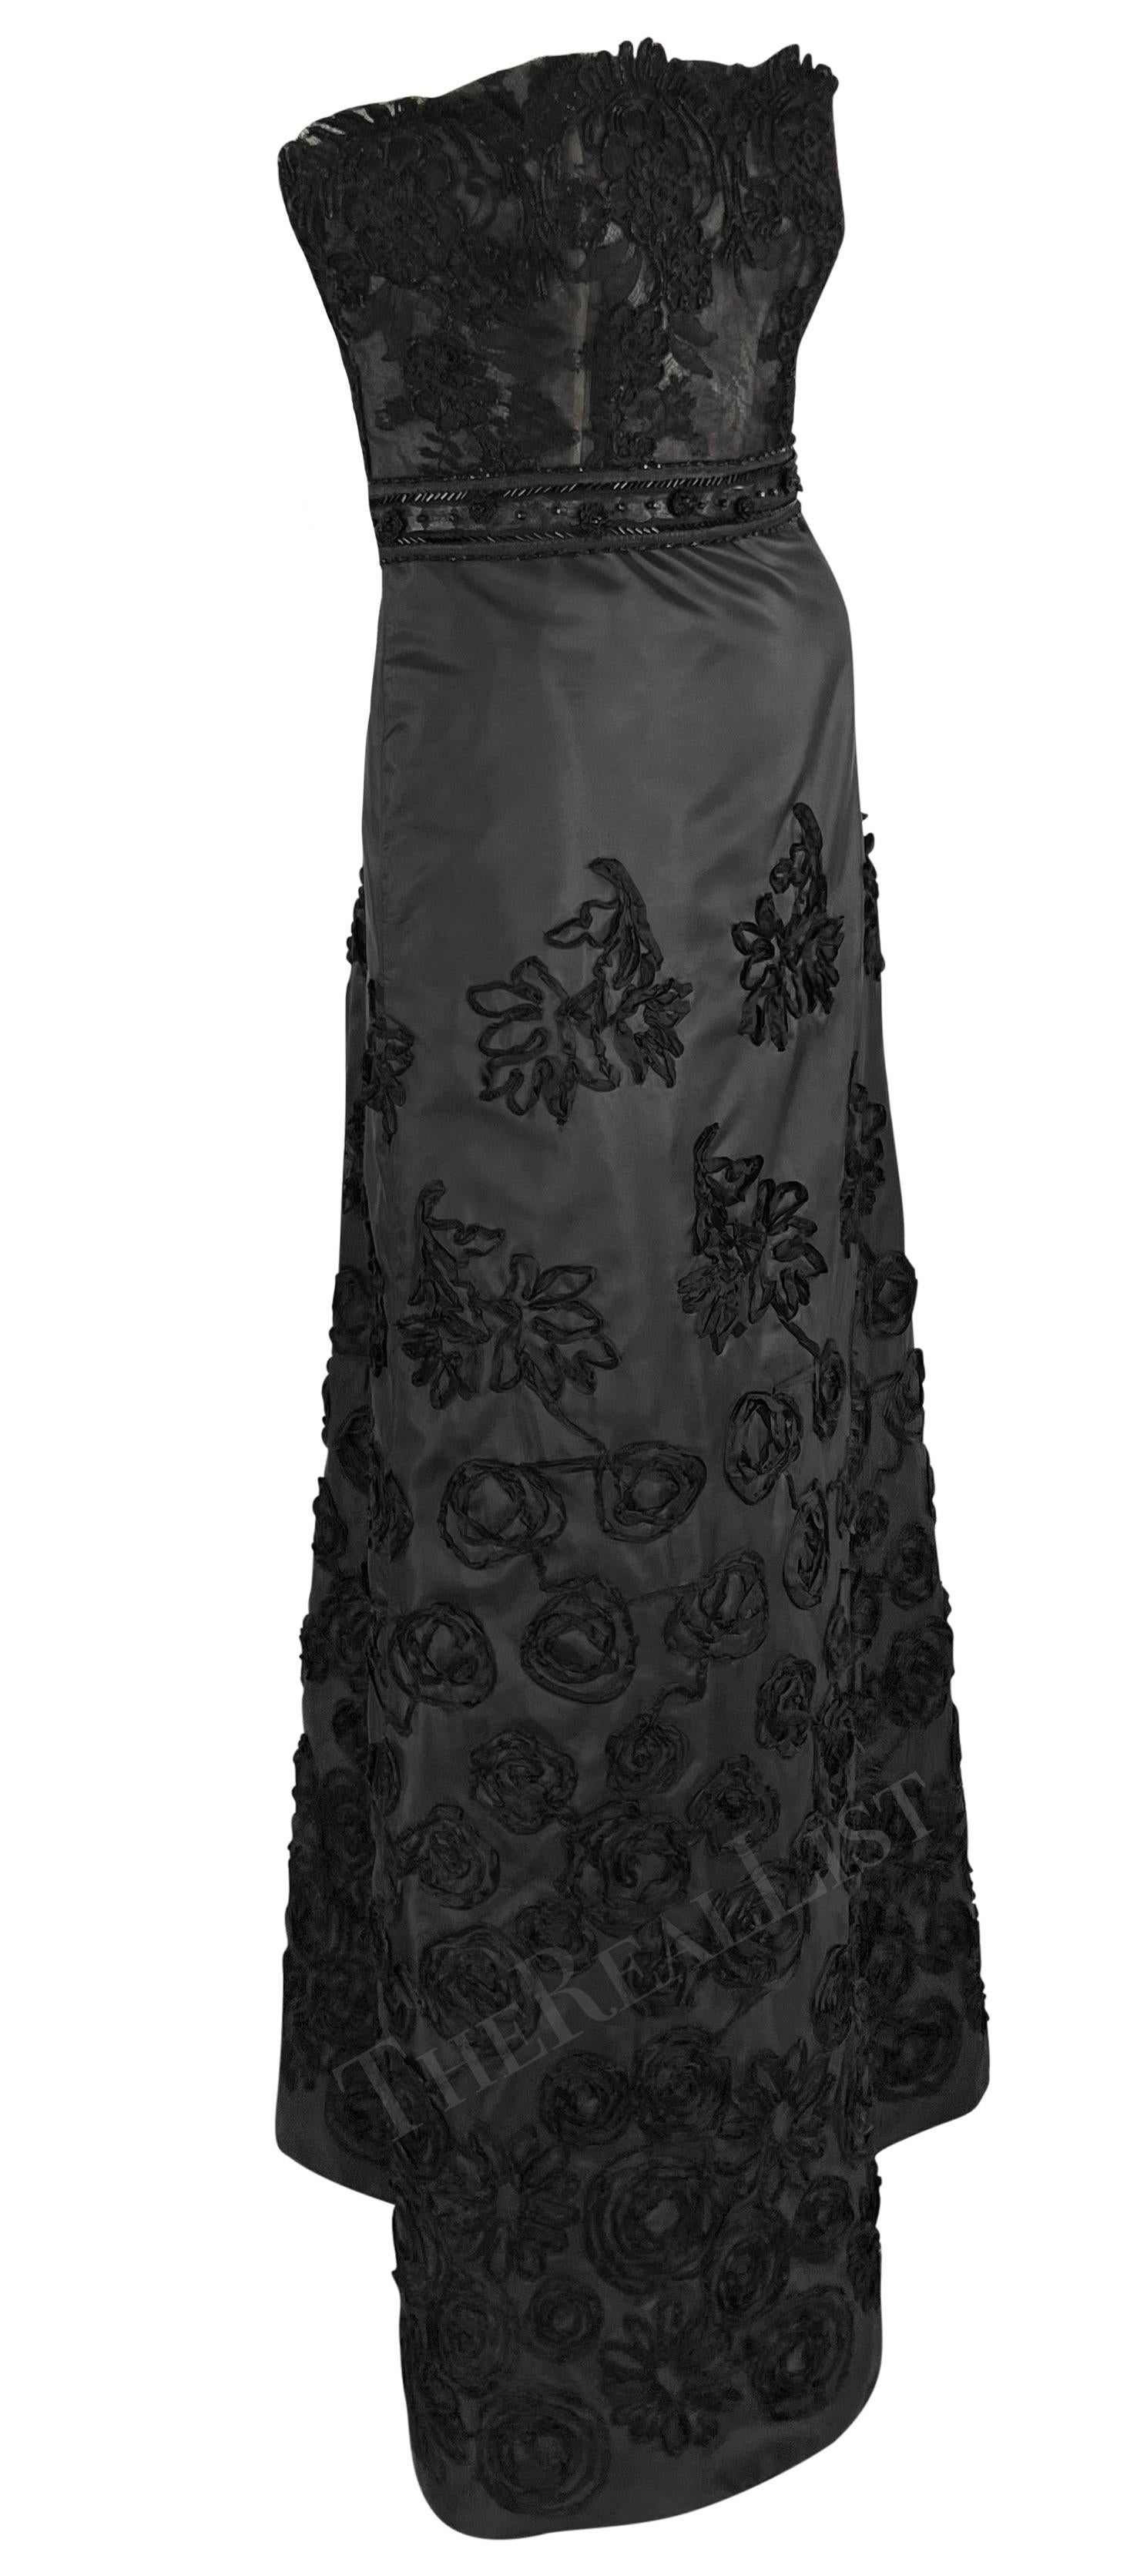 S/S 1999 Christian Lacroix Beaded Lace Overlay Strapless Taffeta Evening Gown For Sale 2